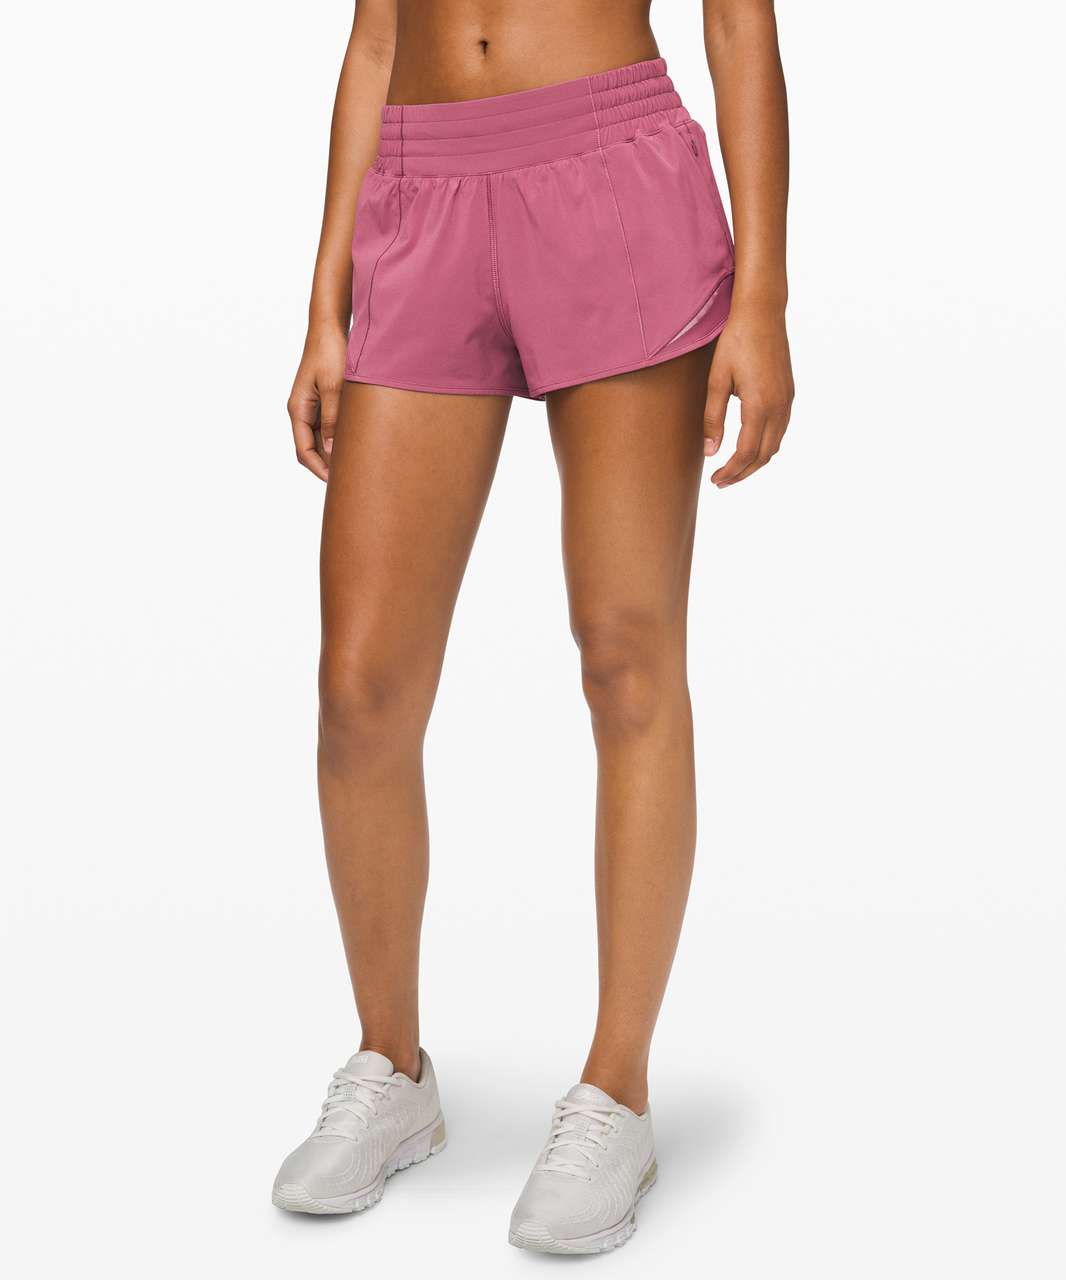 Lululemon Hotty Hot Low-rise Lined Shorts 4 In Moonlit Magenta